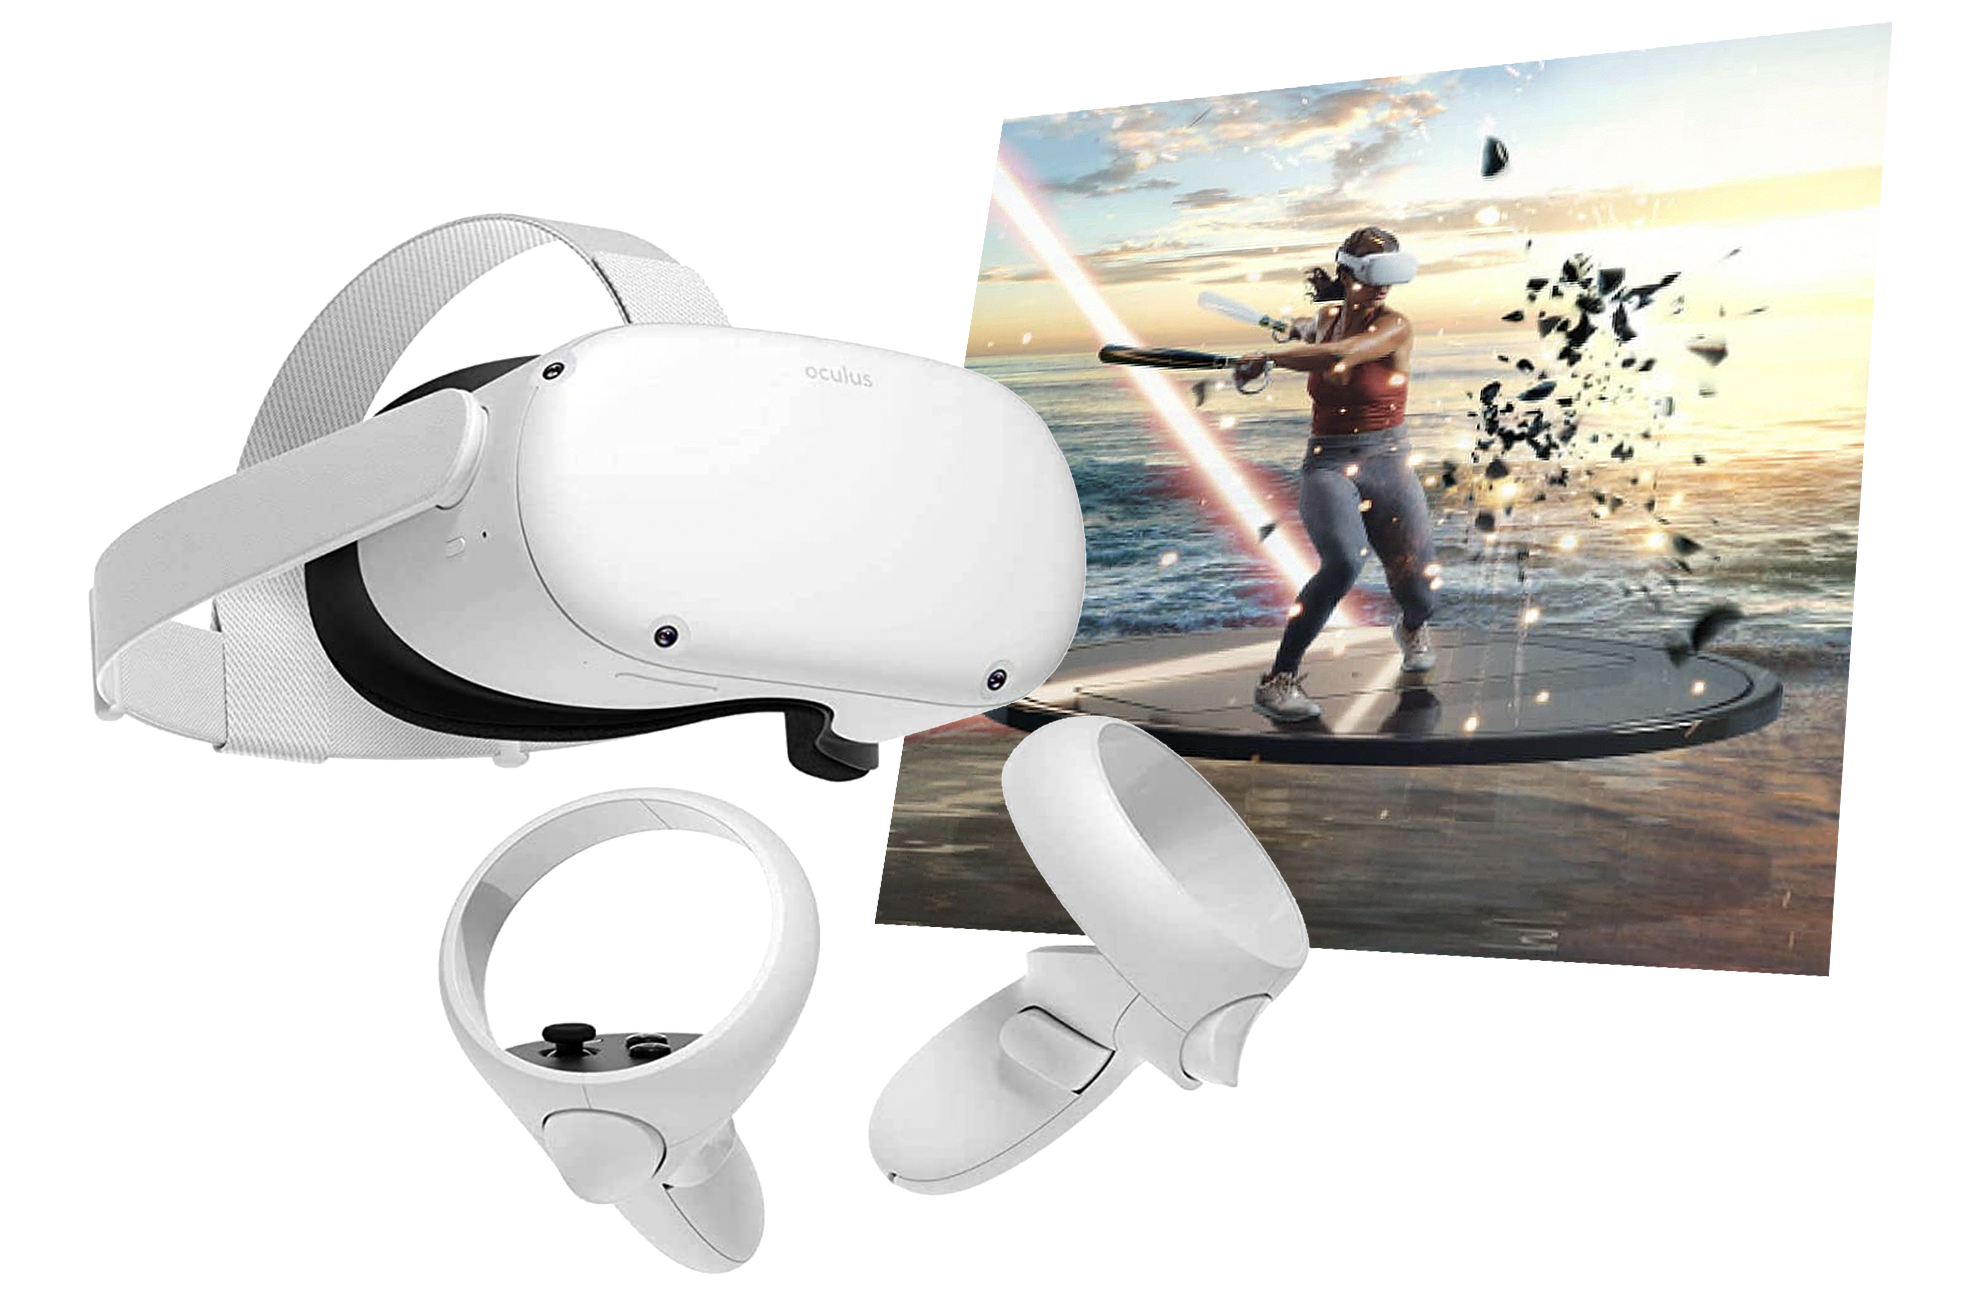 Image of Meta Quest 2 headset with controllers and inset image of a VR game in the background. featured Image